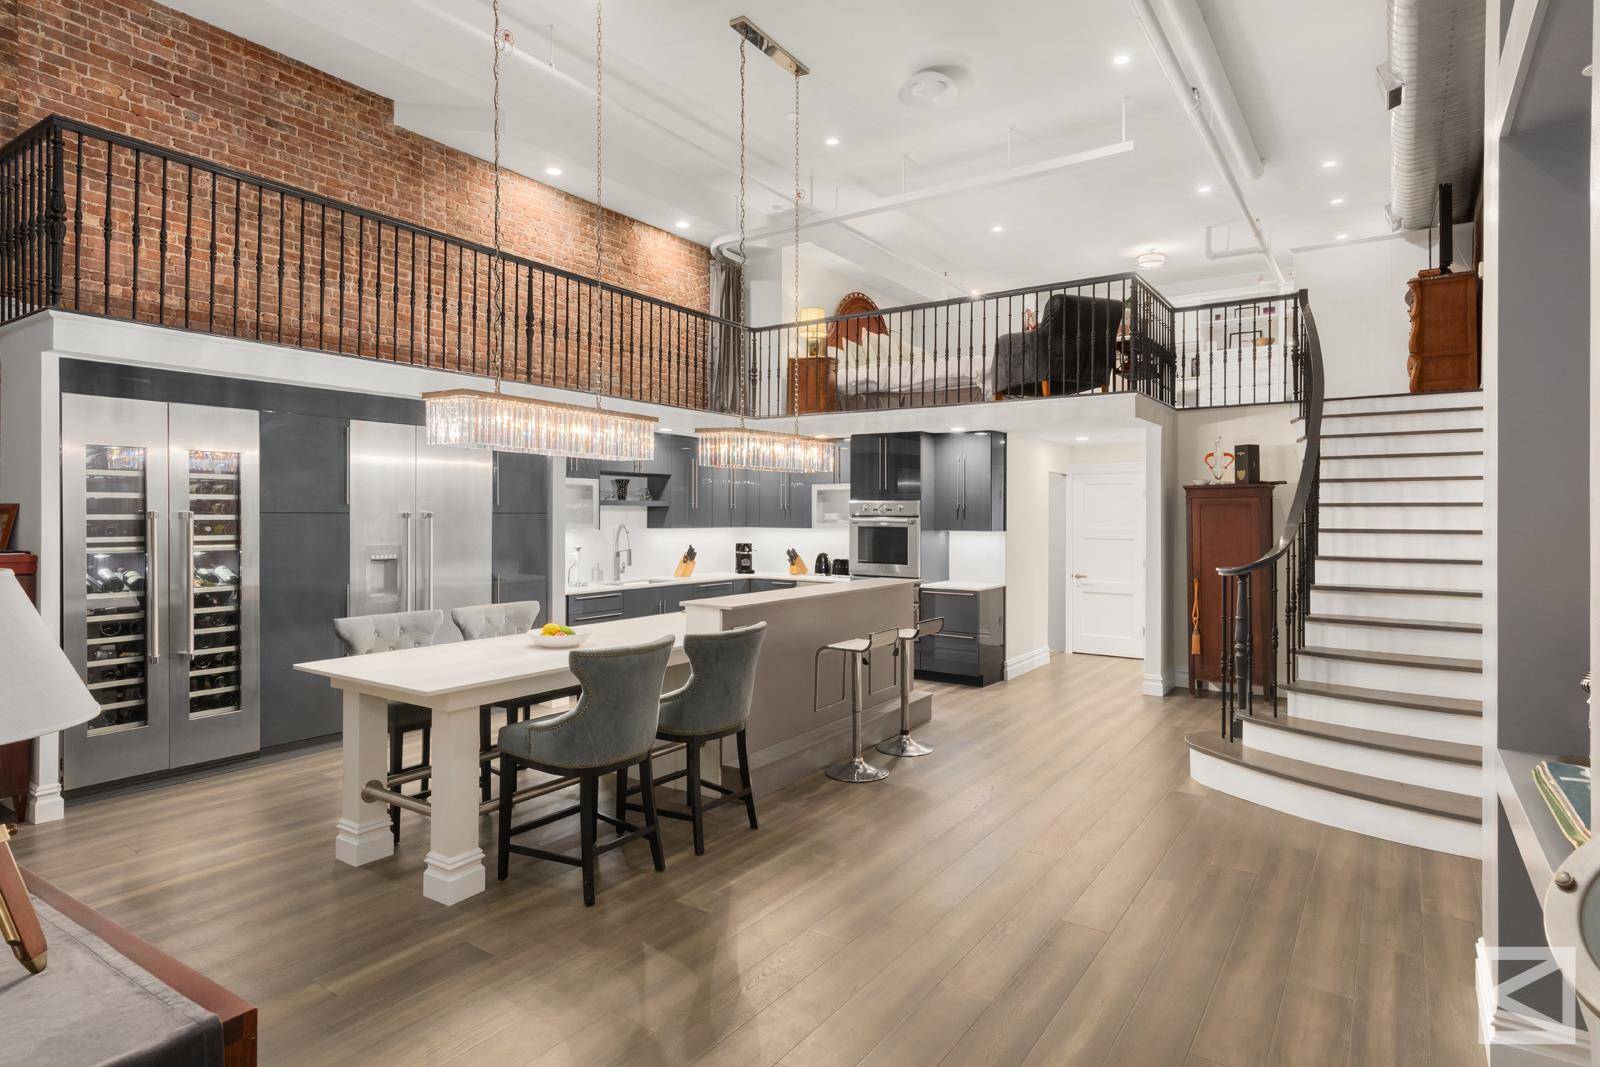 Located on one of the most coveted blocks in the heart of SoHo, this well laid out, traditional loft complete with double height ceilings epitomizes quintessential loft living.